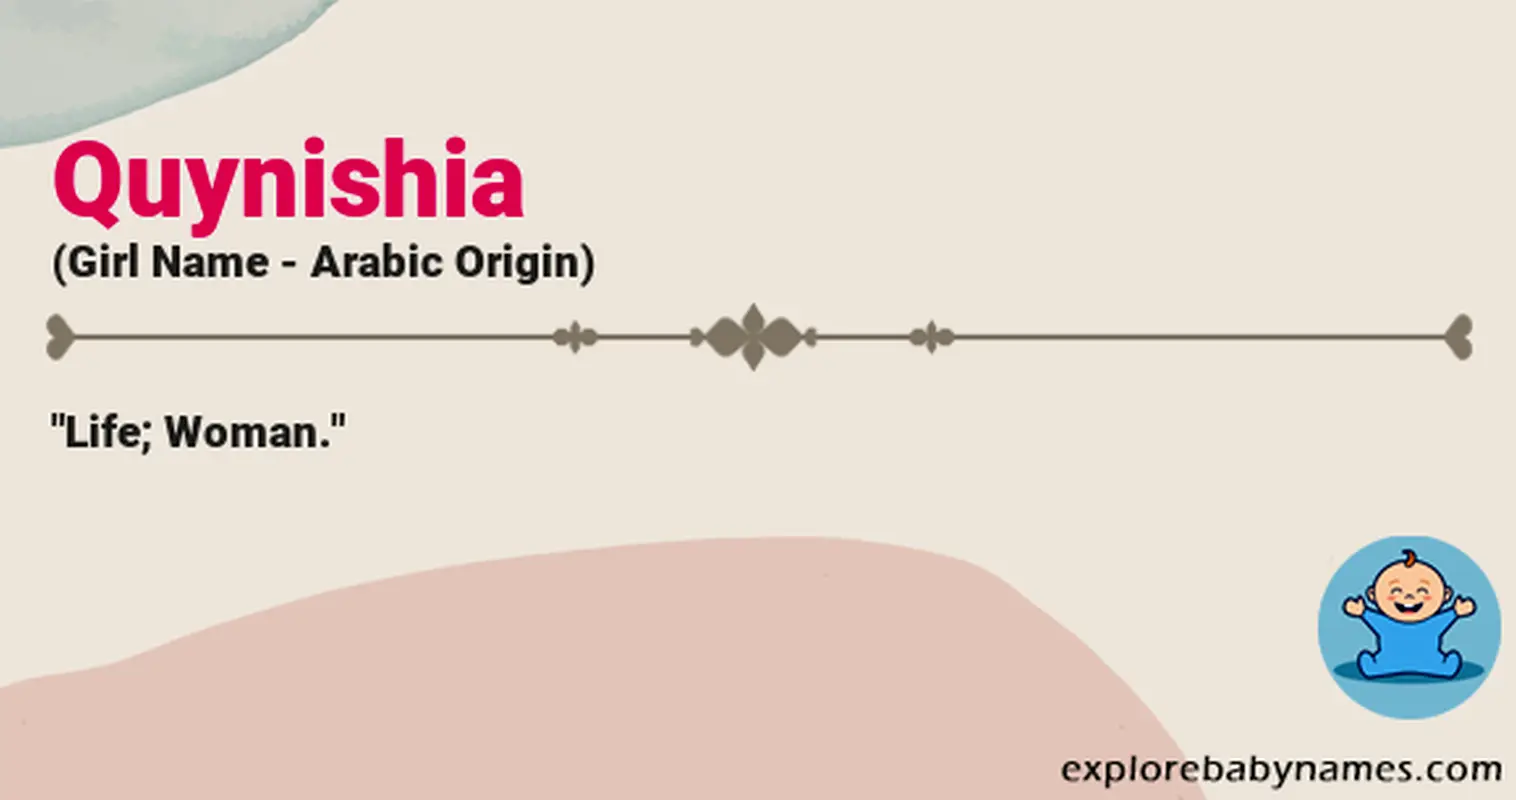 Meaning of Quynishia